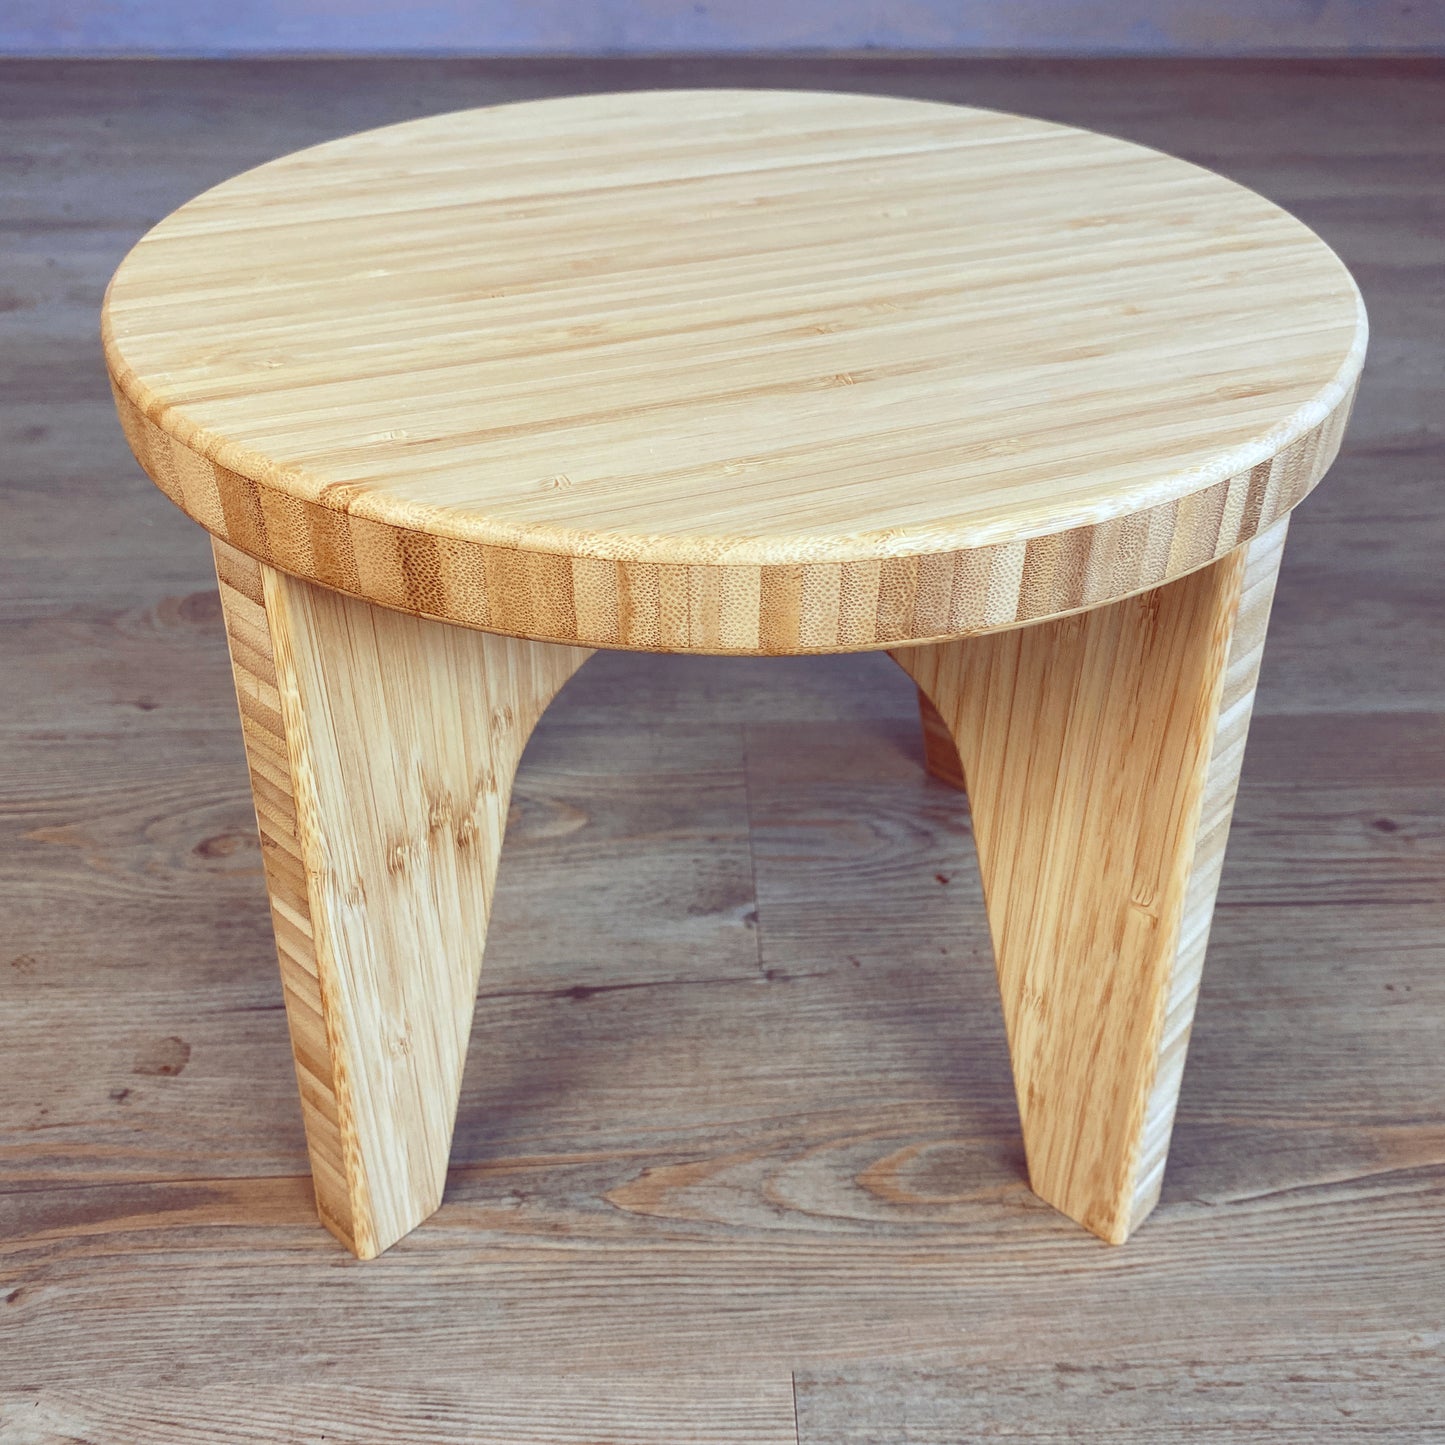 LOW Stool: Natural Bamboo - Round